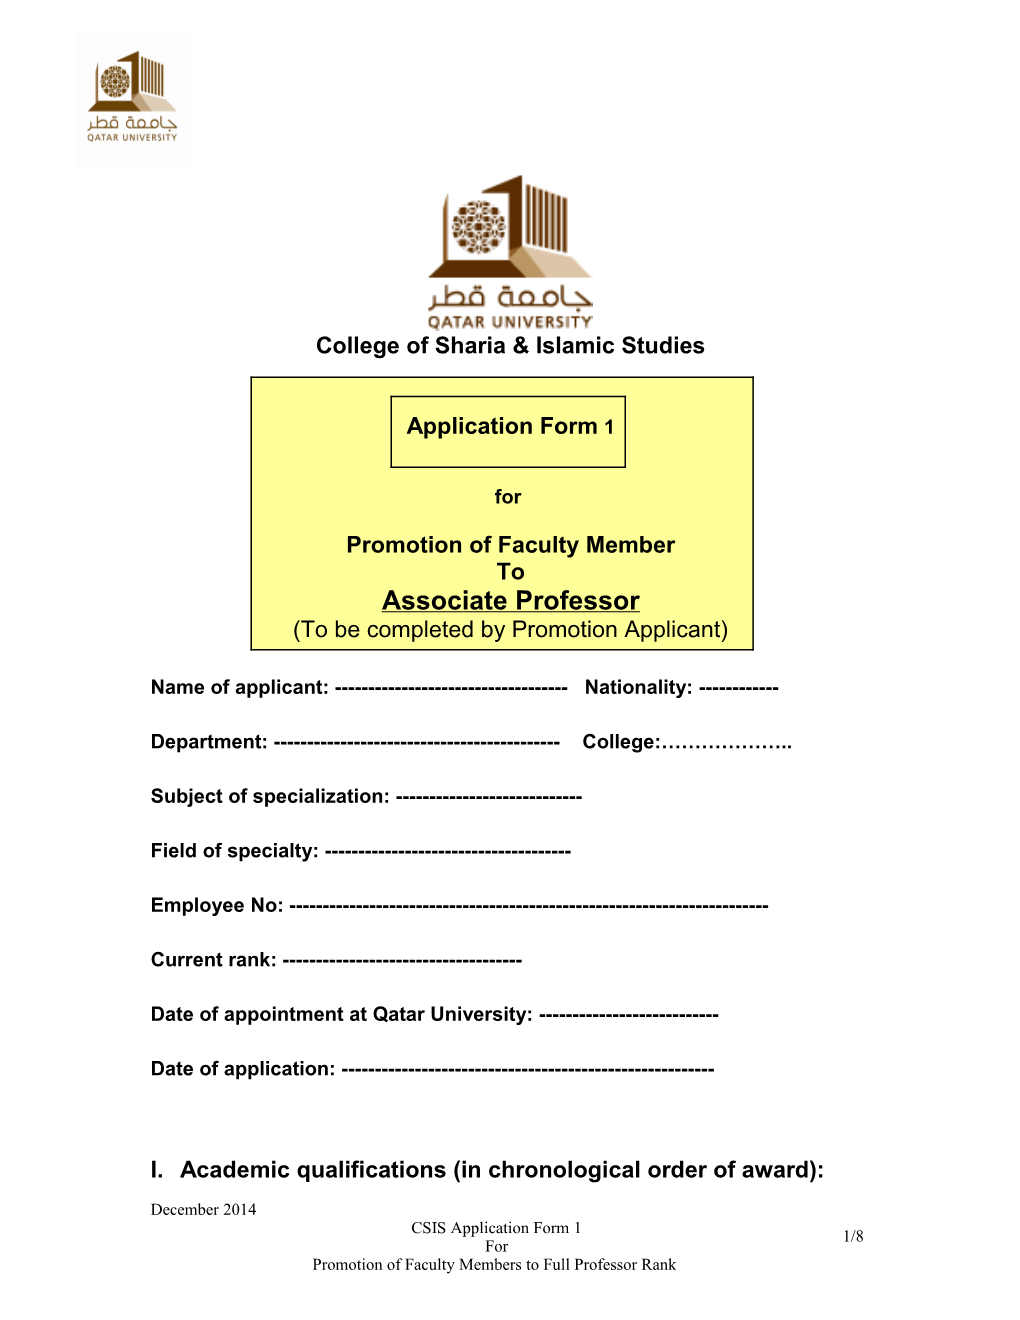 Application Form for Promotion of Staff Members